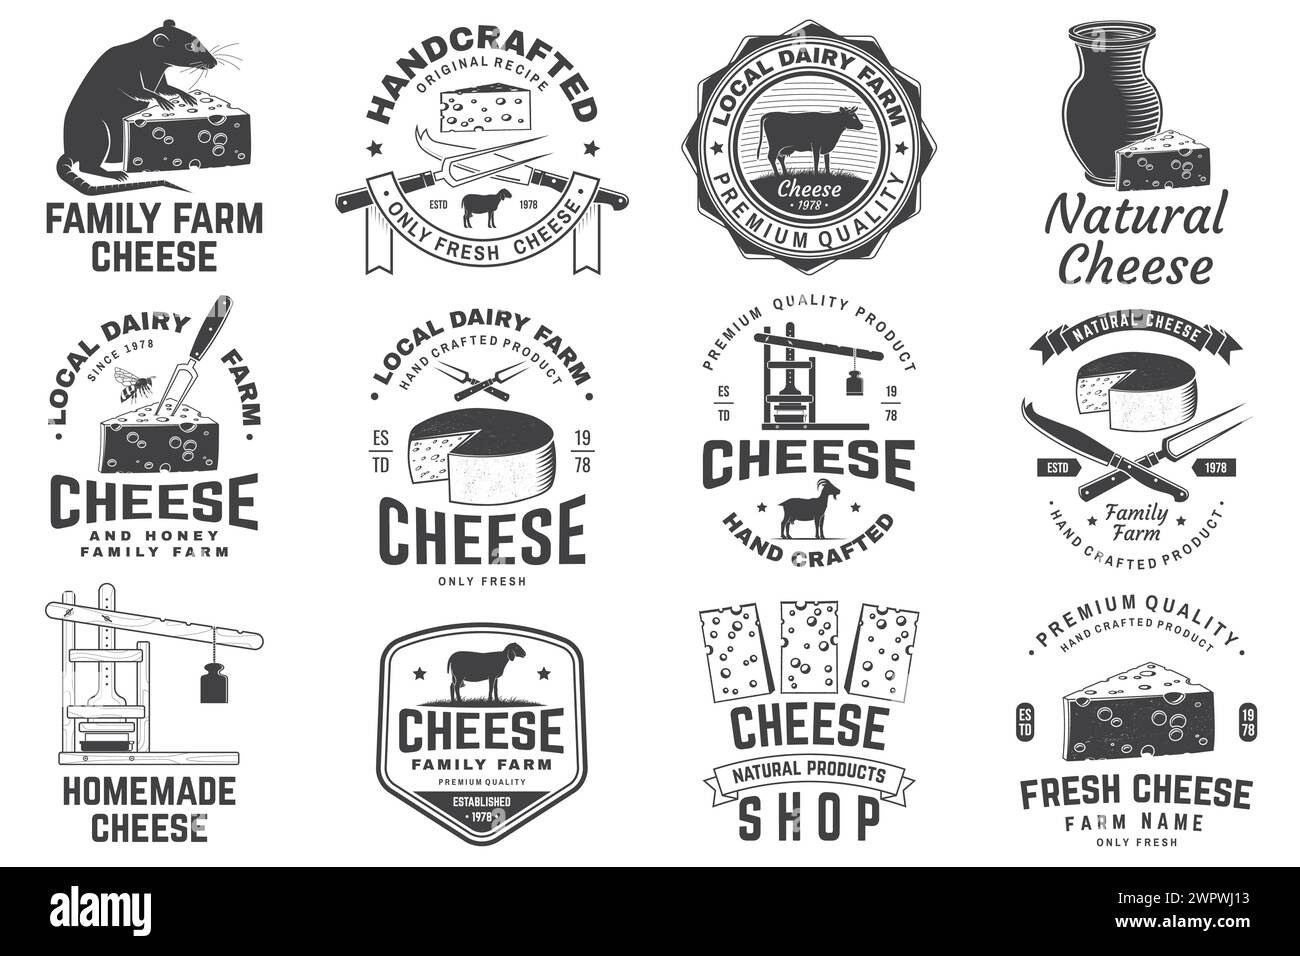 Cheese family farm badge design. Template for logo, branding design with block cheese, sheep lacaune on the grass, fork, knife for cheese, cow, cheese Stock Vector